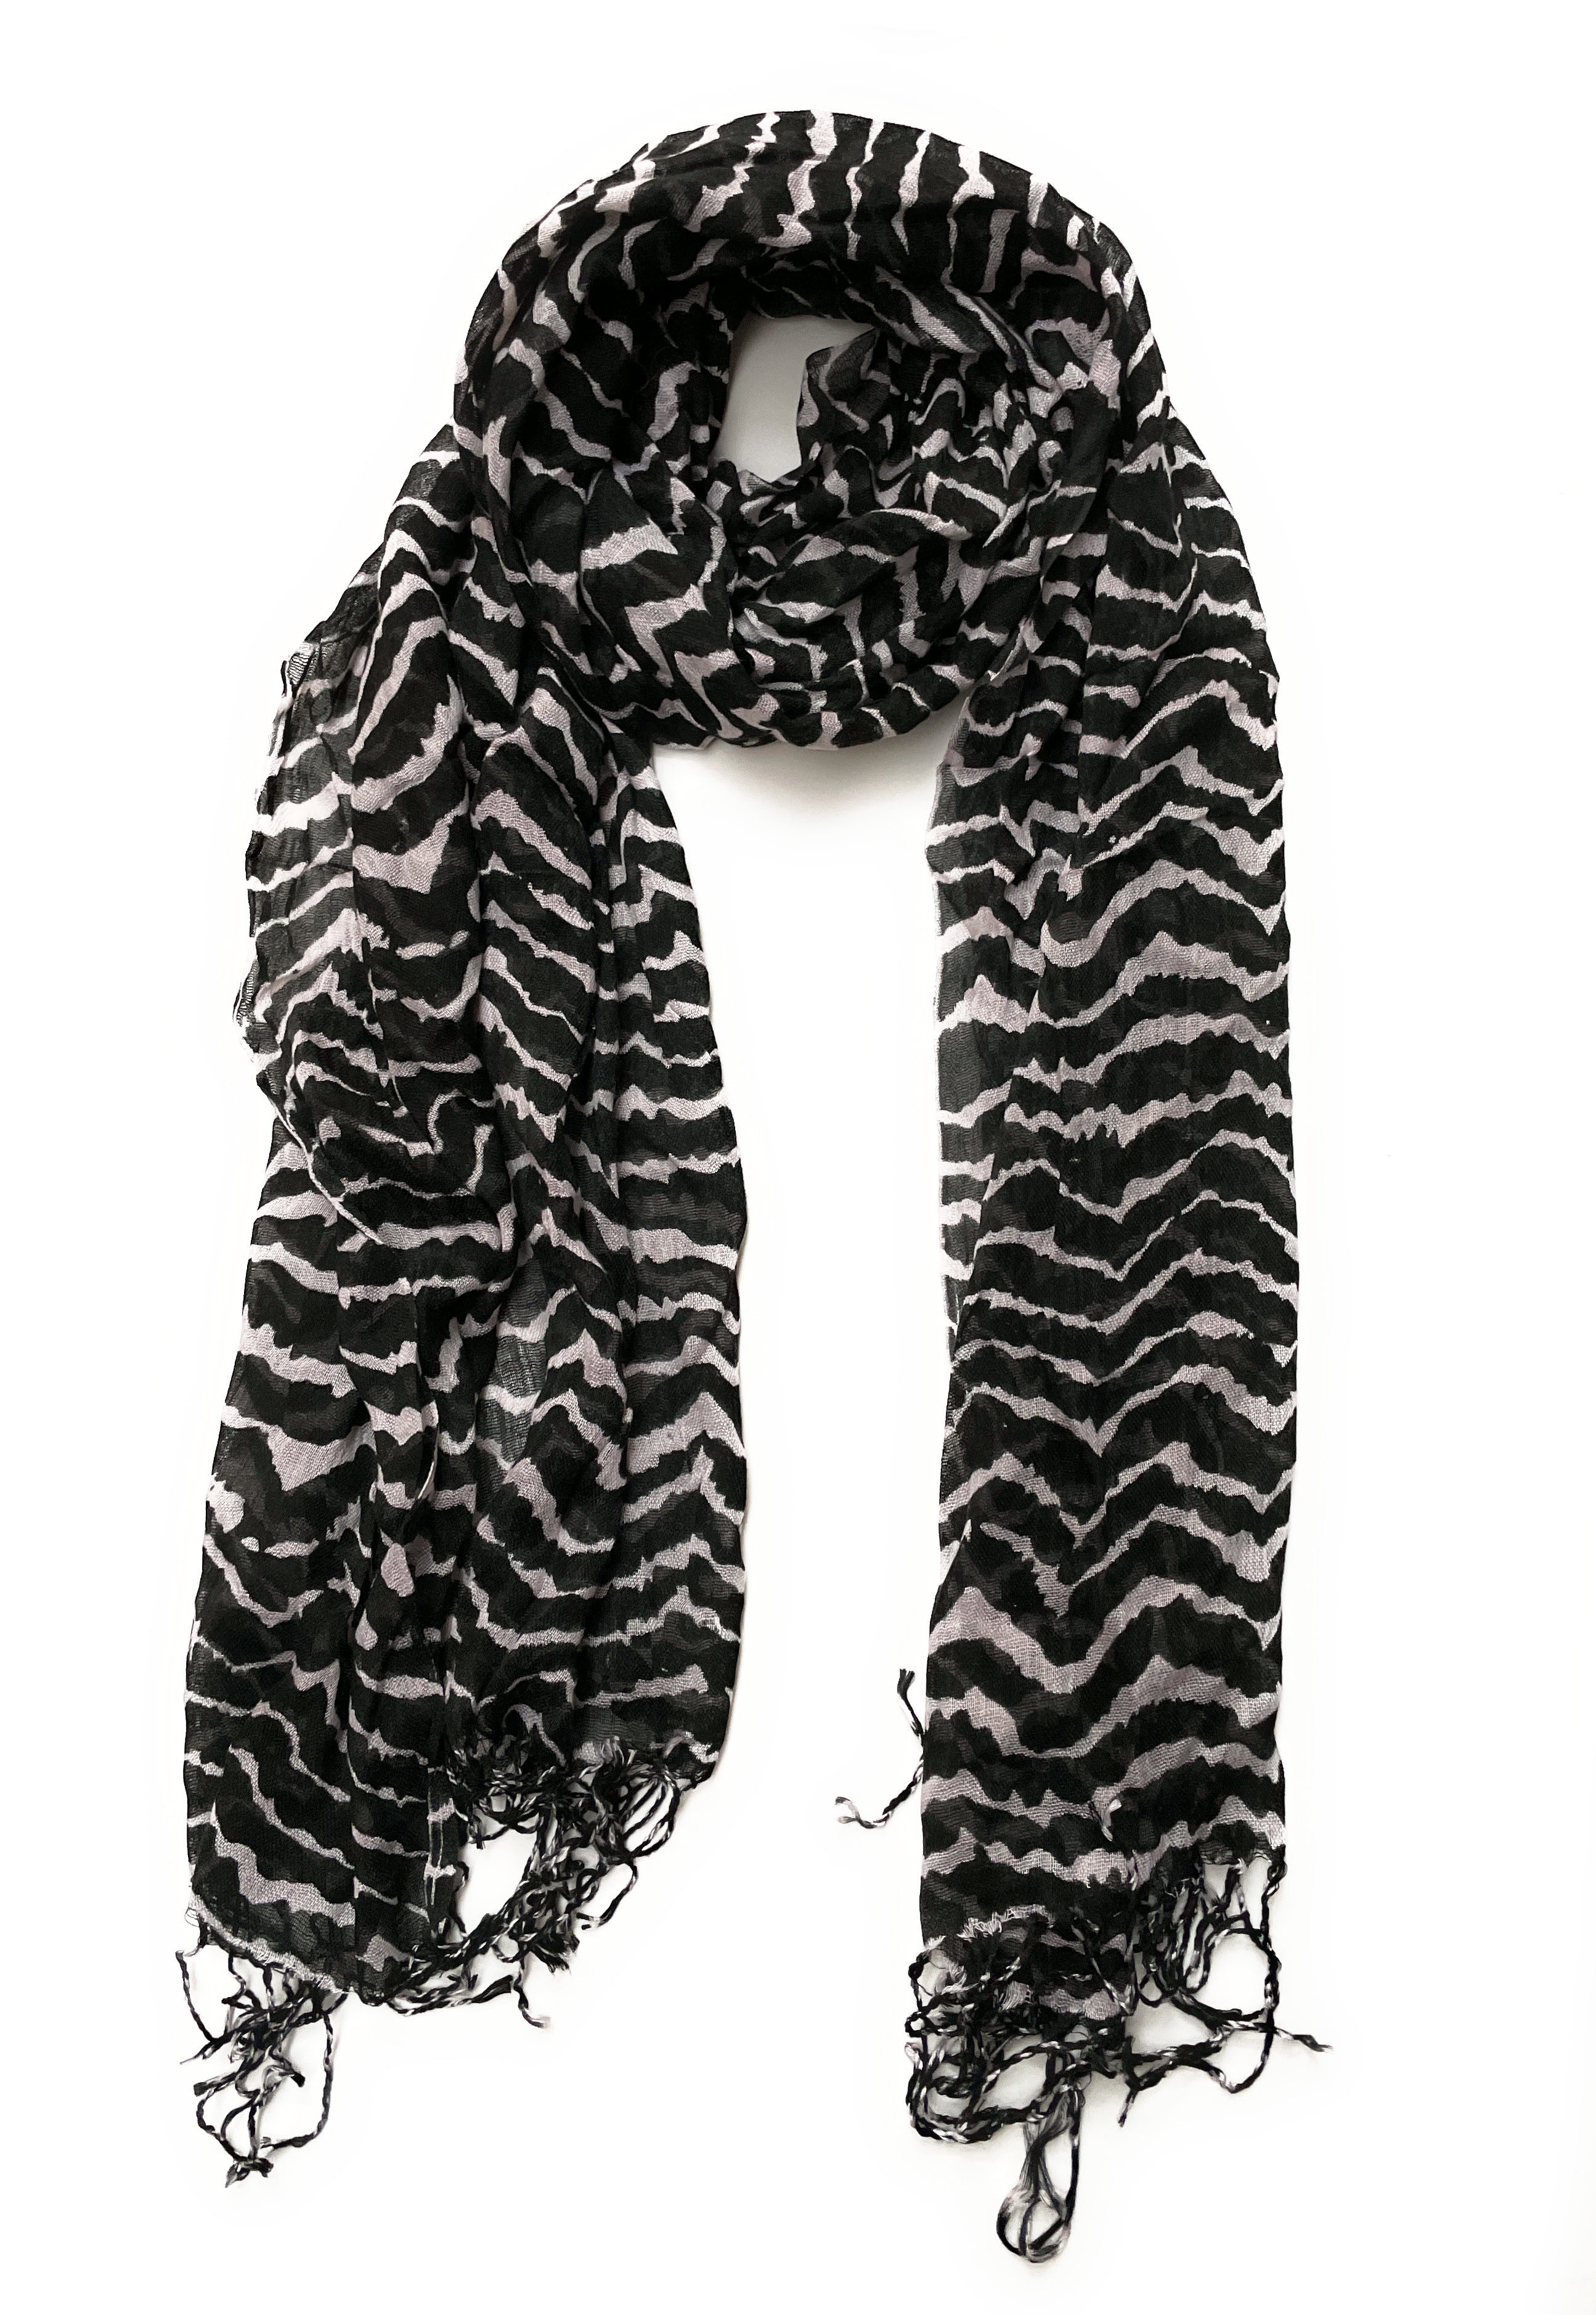 Black and White Stripes Scarf with Tassels Lightweight